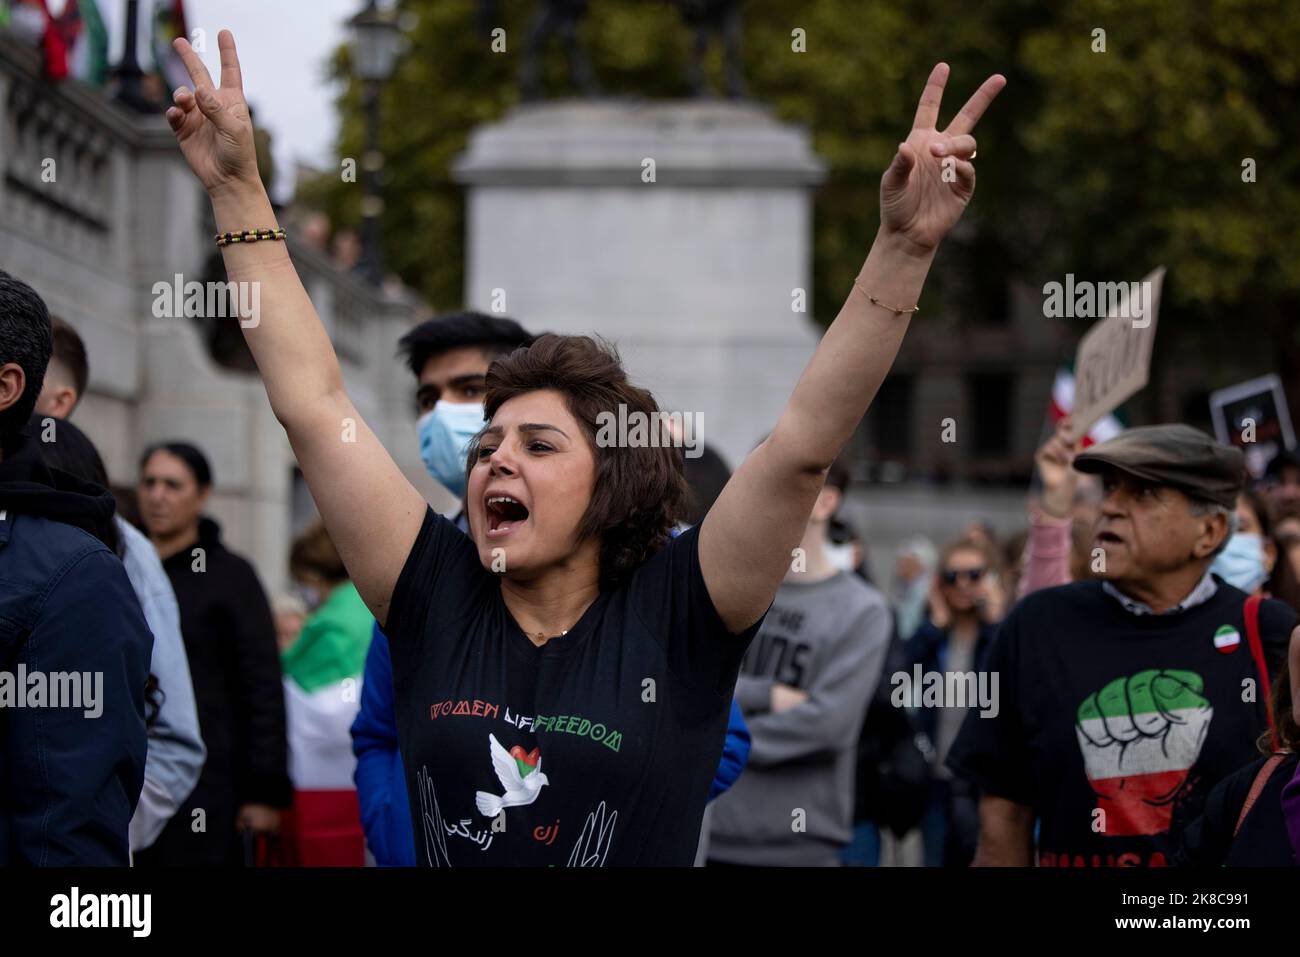 London, UK. 22nd Oct, 2022. An Iranian woman protester seen chanting slogans during the demonstration at Trafalgar Square. Iranians and Iraqi-Kurds residing in the UK and their supporters continue to protest on the streets and demand the UK government to stop supporting the brutality of the Iranian Islamic government after Mahsa Amini died in custody after being arrested by Iran's morality police for not wearing her headscarf in the proper manner. Credit: SOPA Images Limited/Alamy Live News Stock Photo